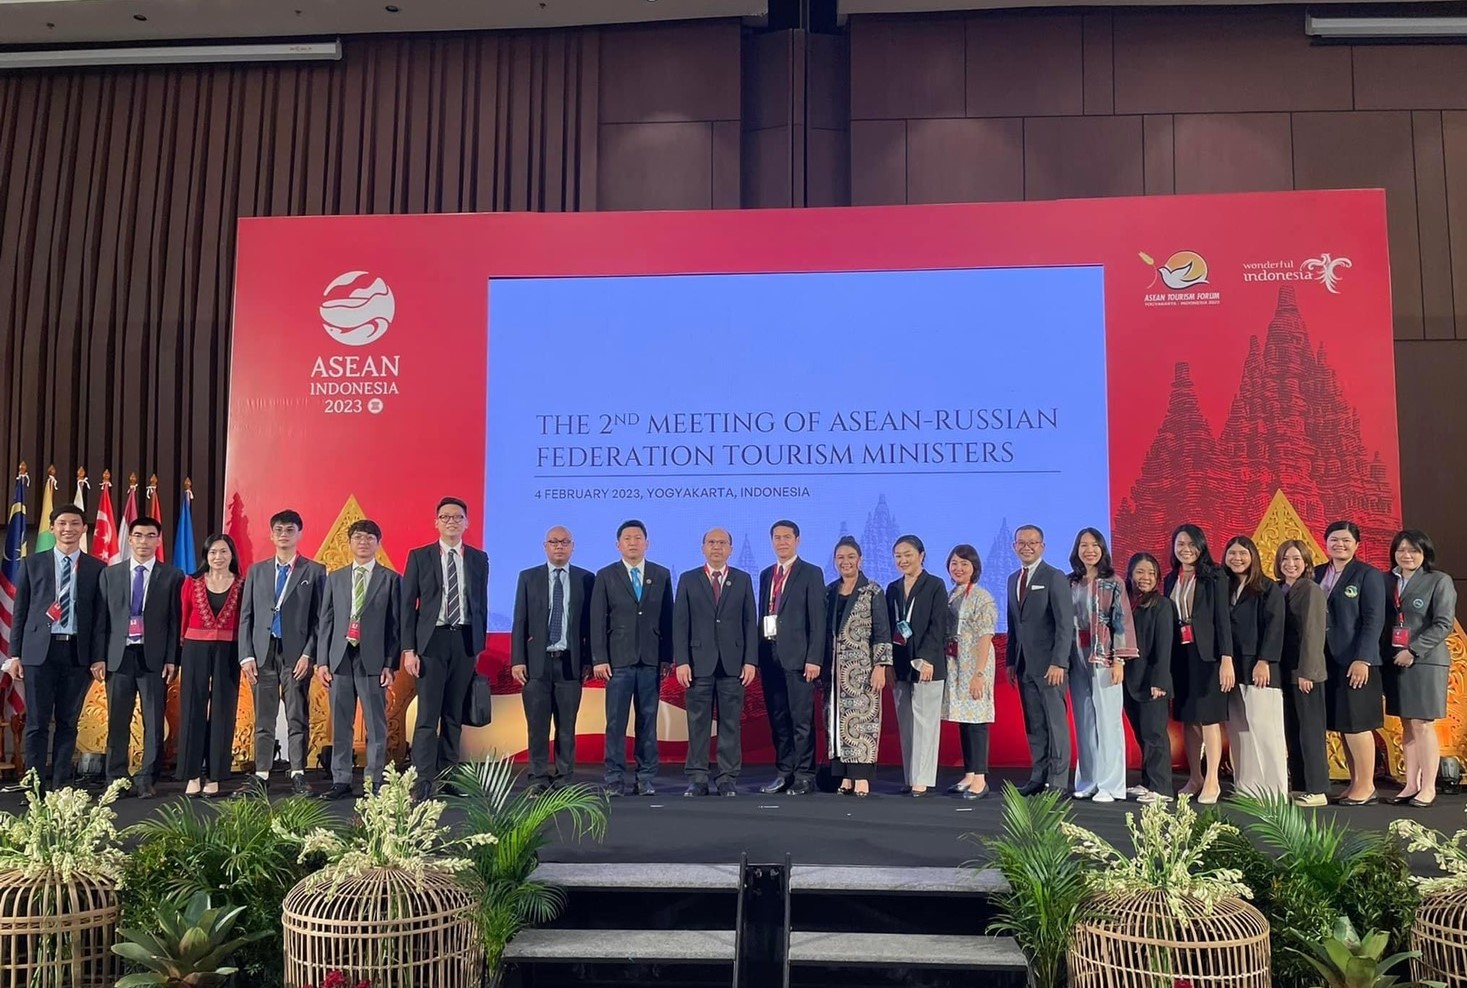 ASEAN Tourism Ministers approve professional standards to strengthen MICE